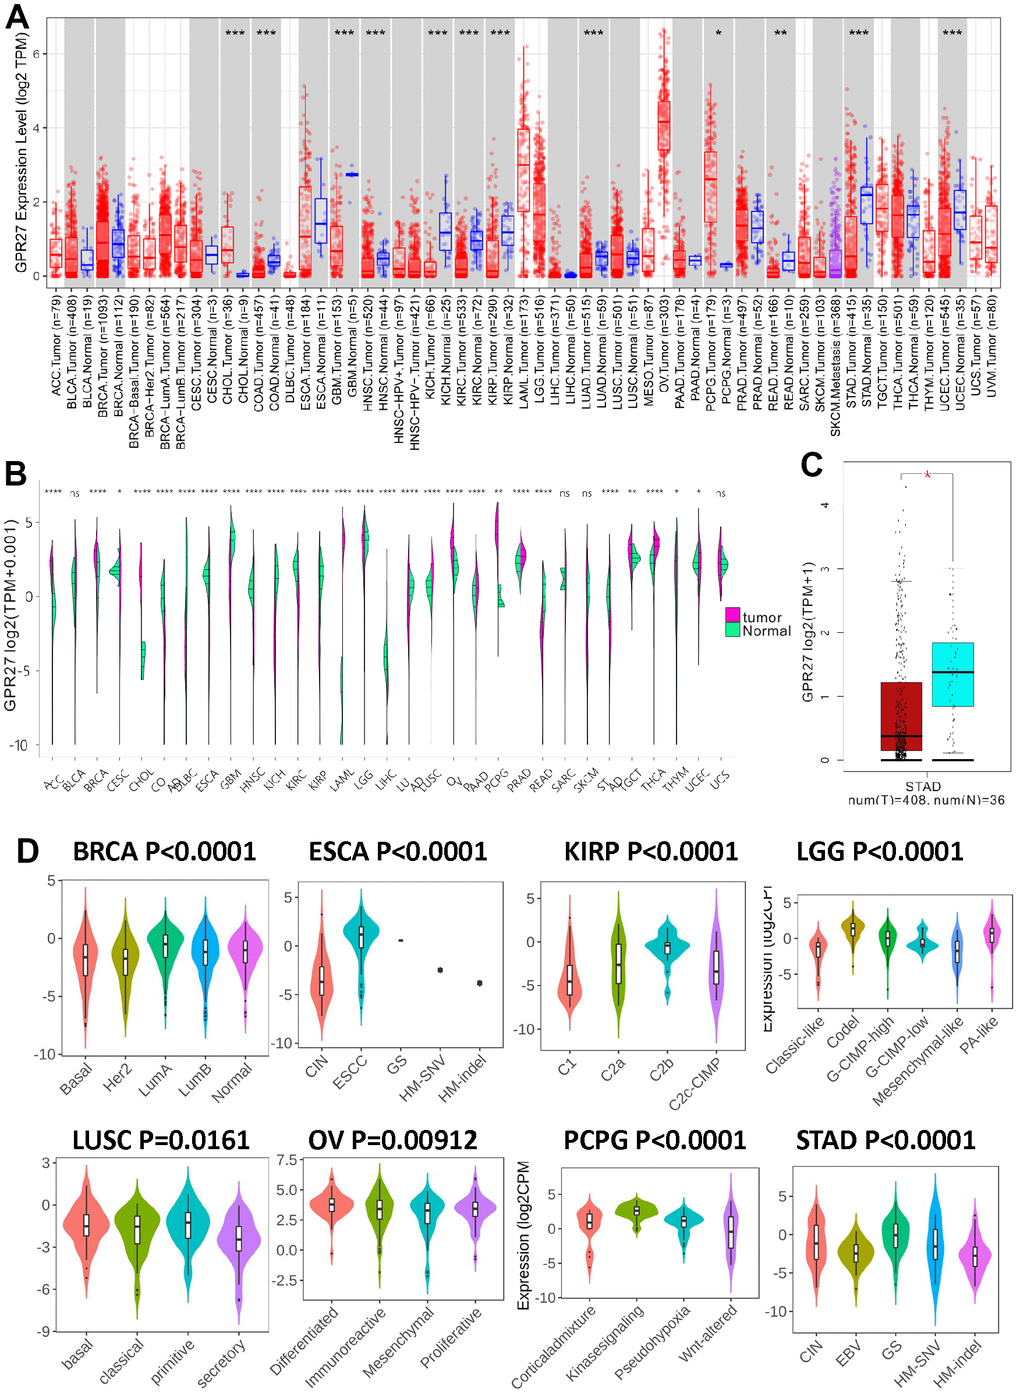 The transcription levels of GPR27 in human cancers. GPR27 mRNA expression in pan-cancer from TIMER (https://cistrome.shinyapps.io/timer/) (A) and Xena Shiny (https://shiny.hiplot.com.cn/ucsc-xena-shiny/) (B) and gastric cancer (C). The expression of GPR27 in different molecular subtypes of cancers via TISIDB (http://cis.hku.hk/TISIDB/index.php) (D).